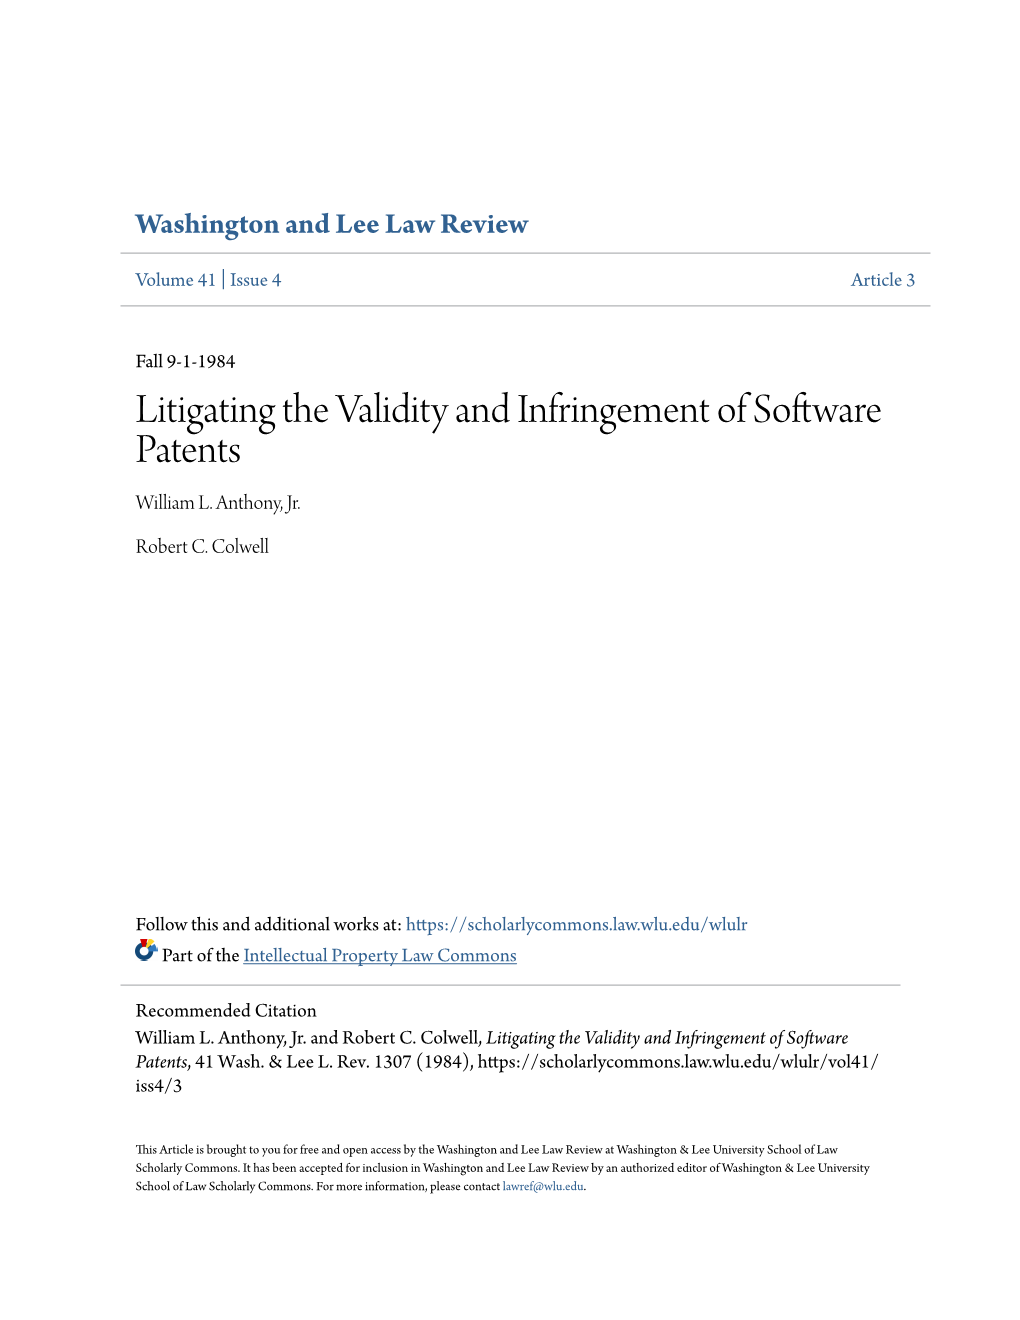 Litigating the Validity and Infringement of Software Patents William L